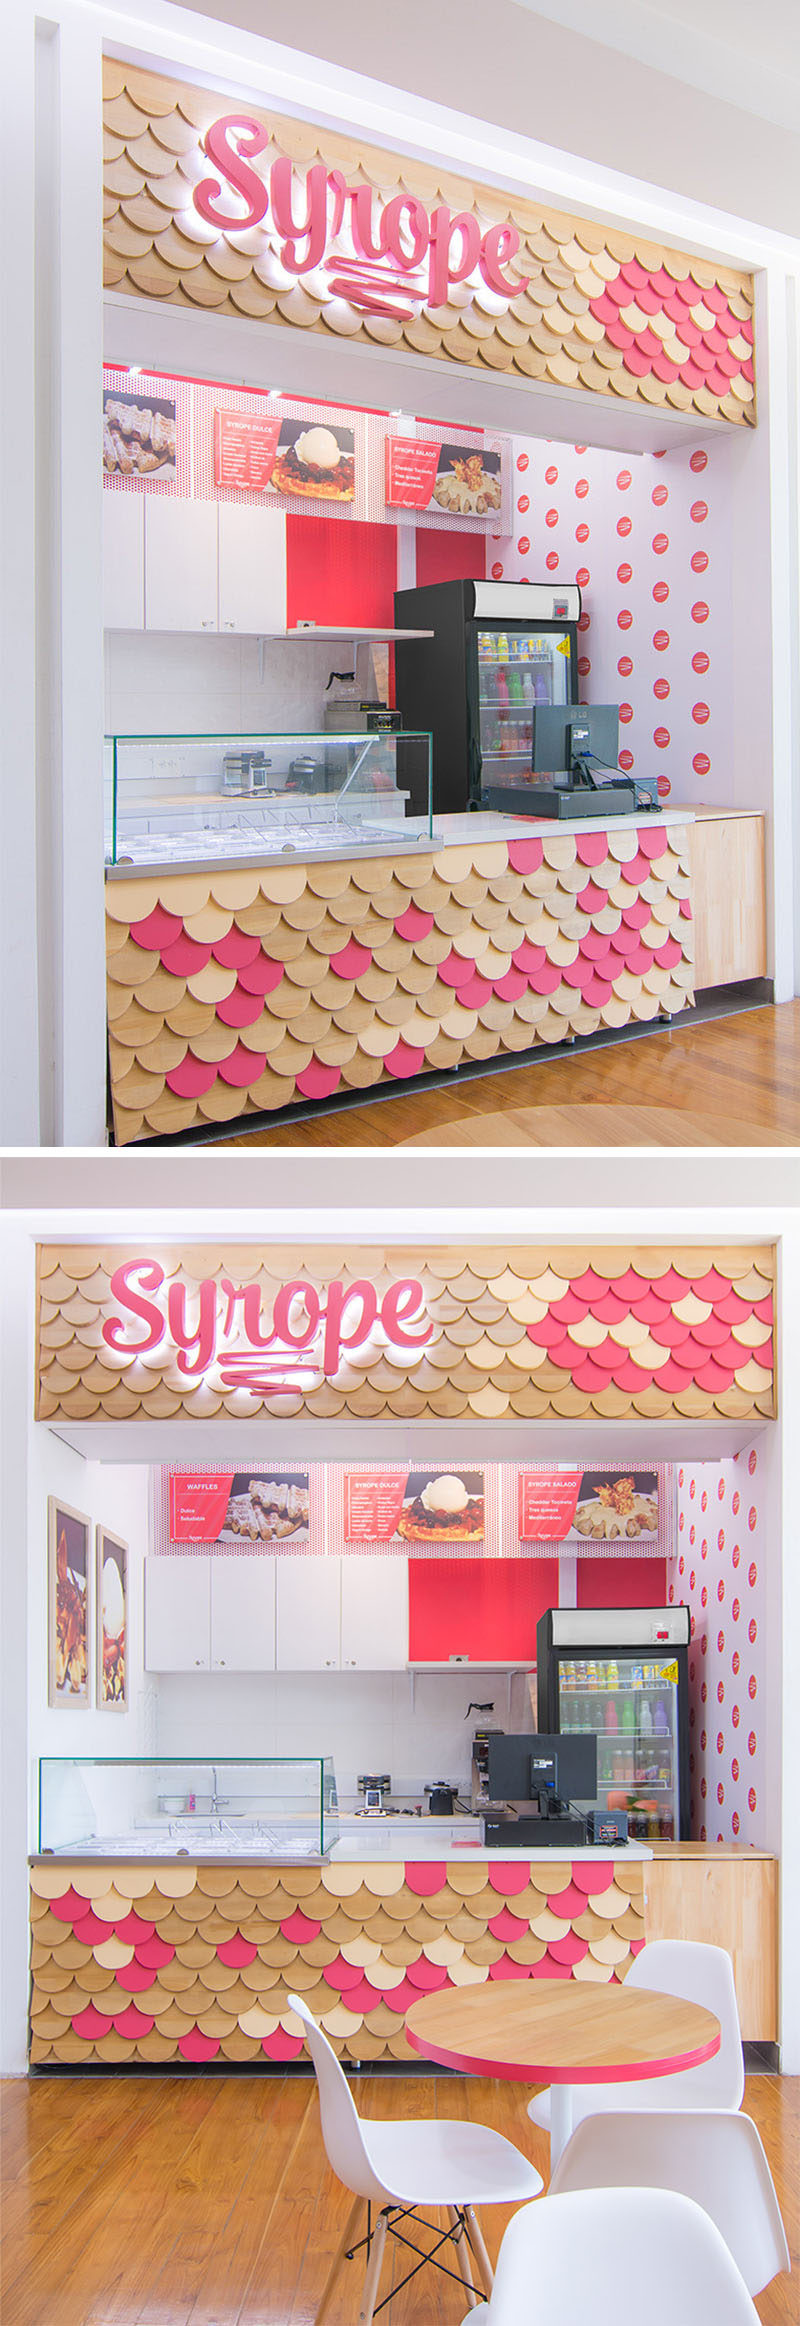 This retail storefront features a bright and colorful design, with a textural scalloped patterned facade made from wood, with some of the pieces painted pink to match the logo, while the remainder of the storefront is white with just a few touches of pink.